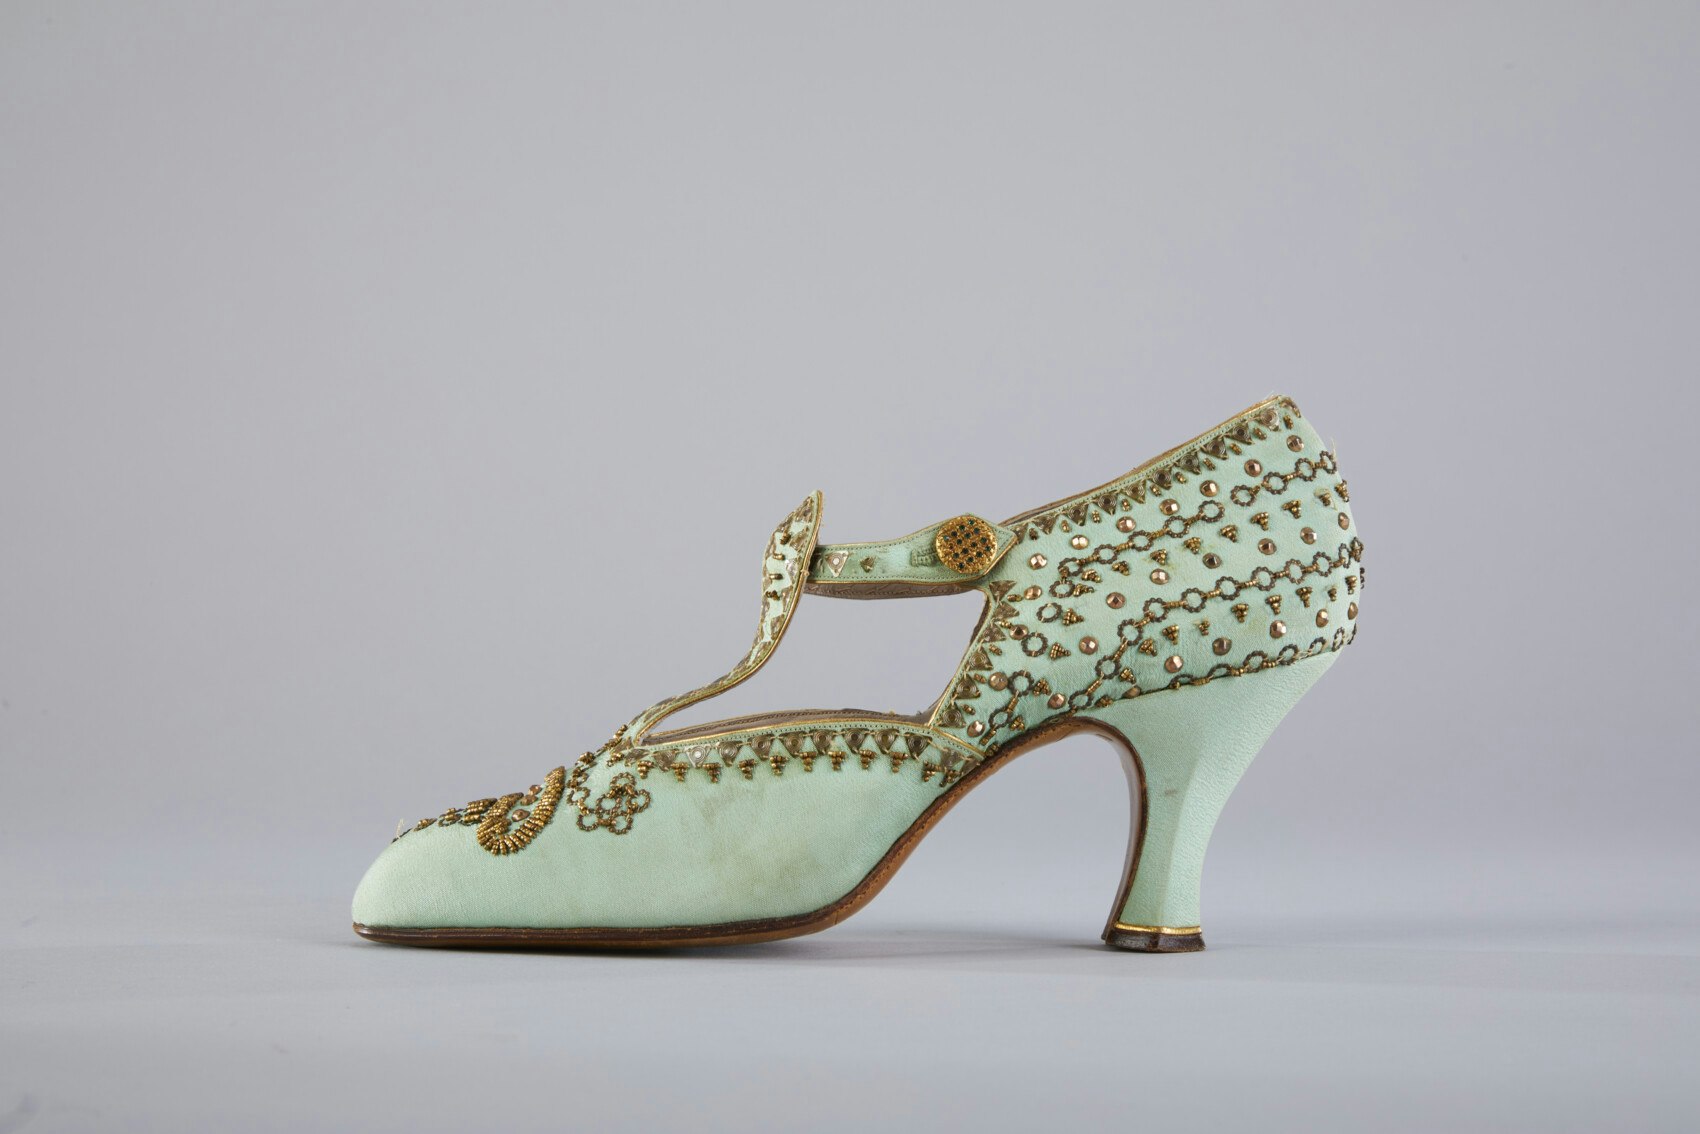 A minty green shoe with a point and a heel. It has gold stitching.